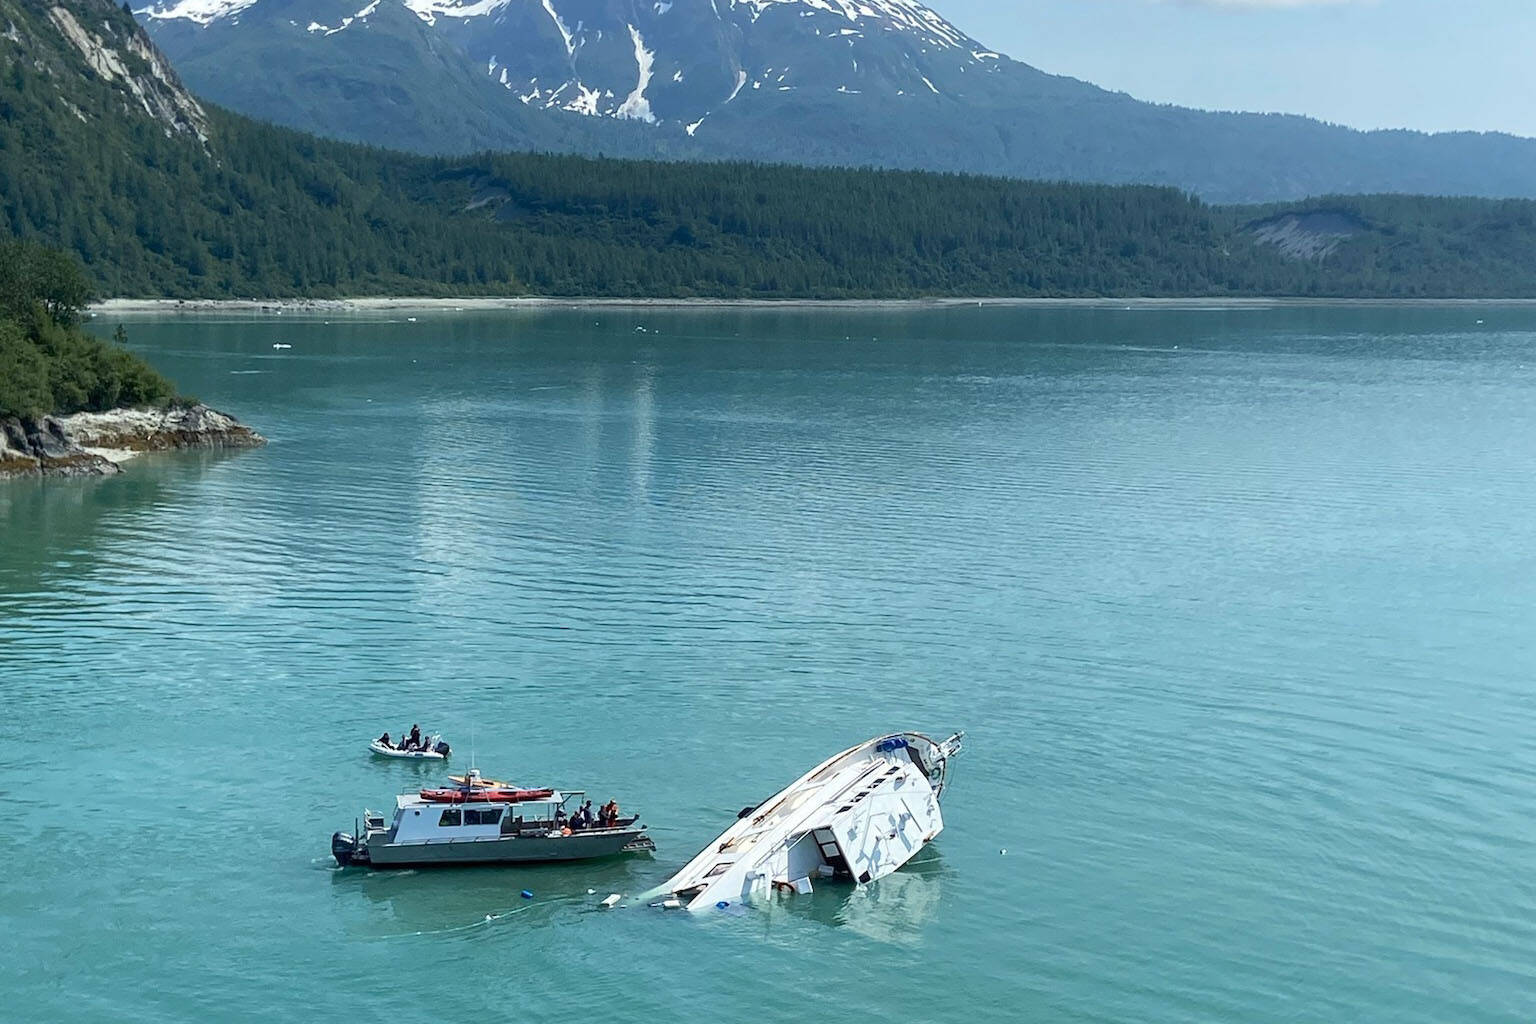 A Coast Guard aircrew and a Good Samaritan vessel rescued four mariners after their boat capsized in Glacier Bay National Park, Alaska, July 1, 2022. (Courtesy photo / USCG)